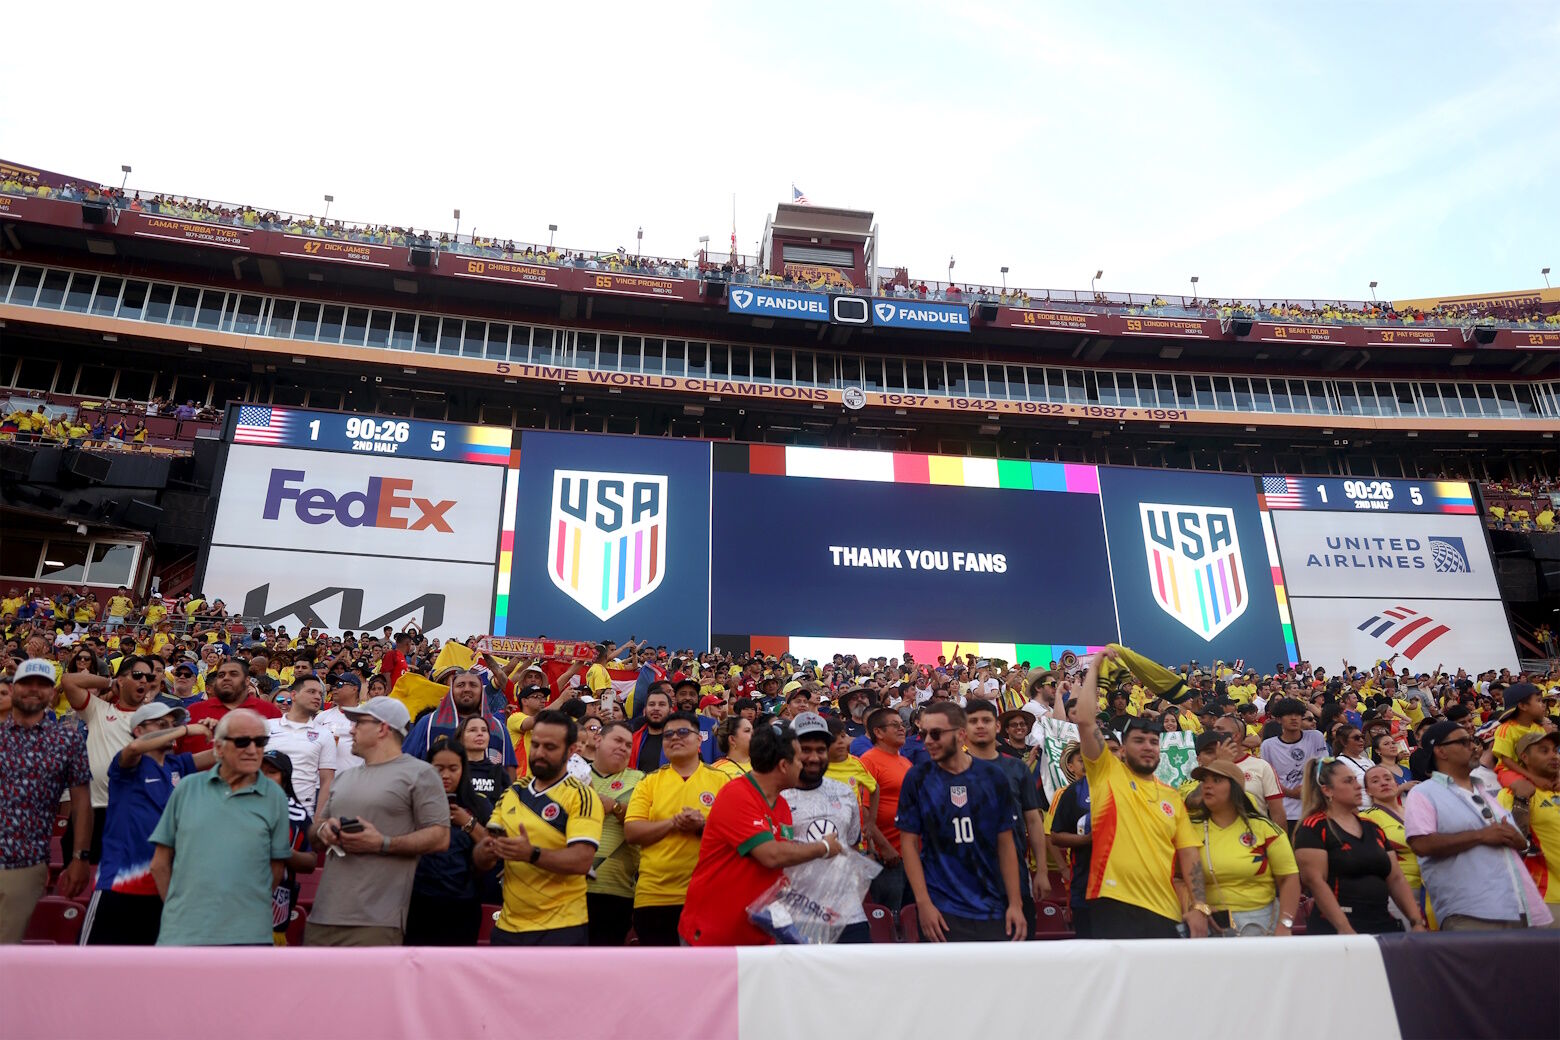 LANDOVER, MARYLAND - JUNE 08: A general view following a match between the United States and Colombia at Commanders Field on June 08, 2024 in Landover, Maryland. (Photo by Tim Nwachukwu/Getty Images)